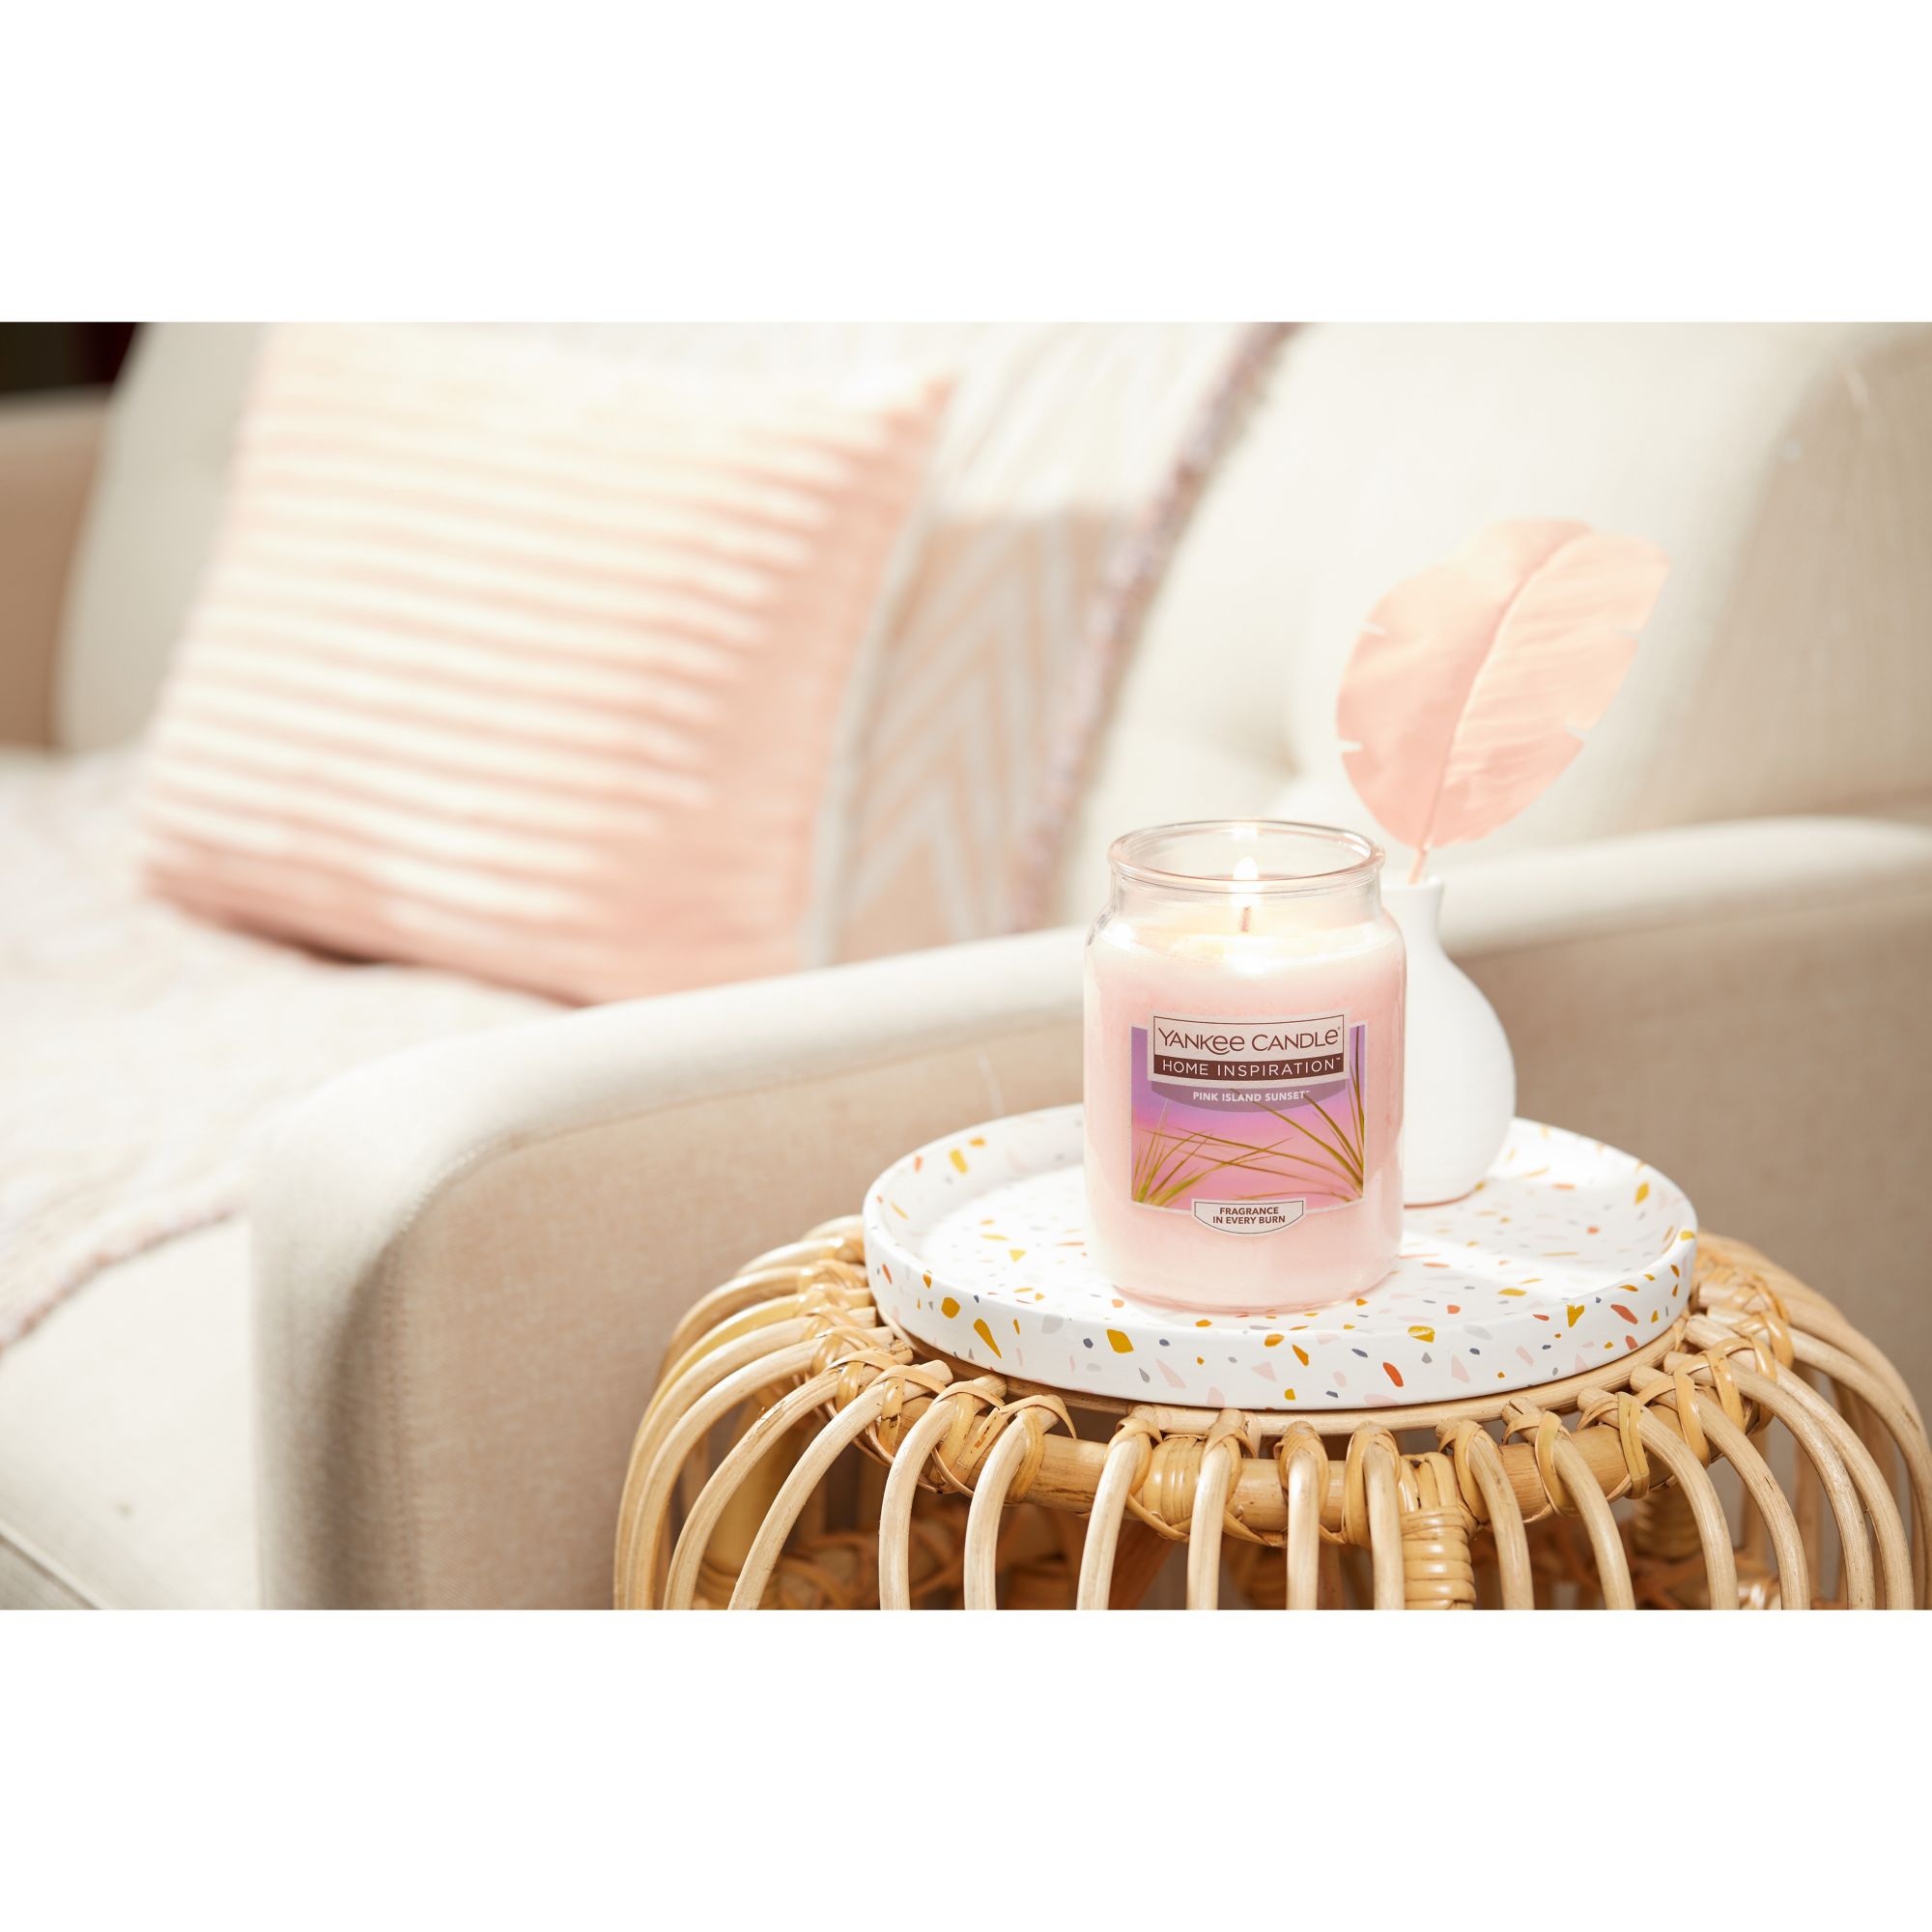 candle YANKEE CANDLE fragrance SOFT BLANKET